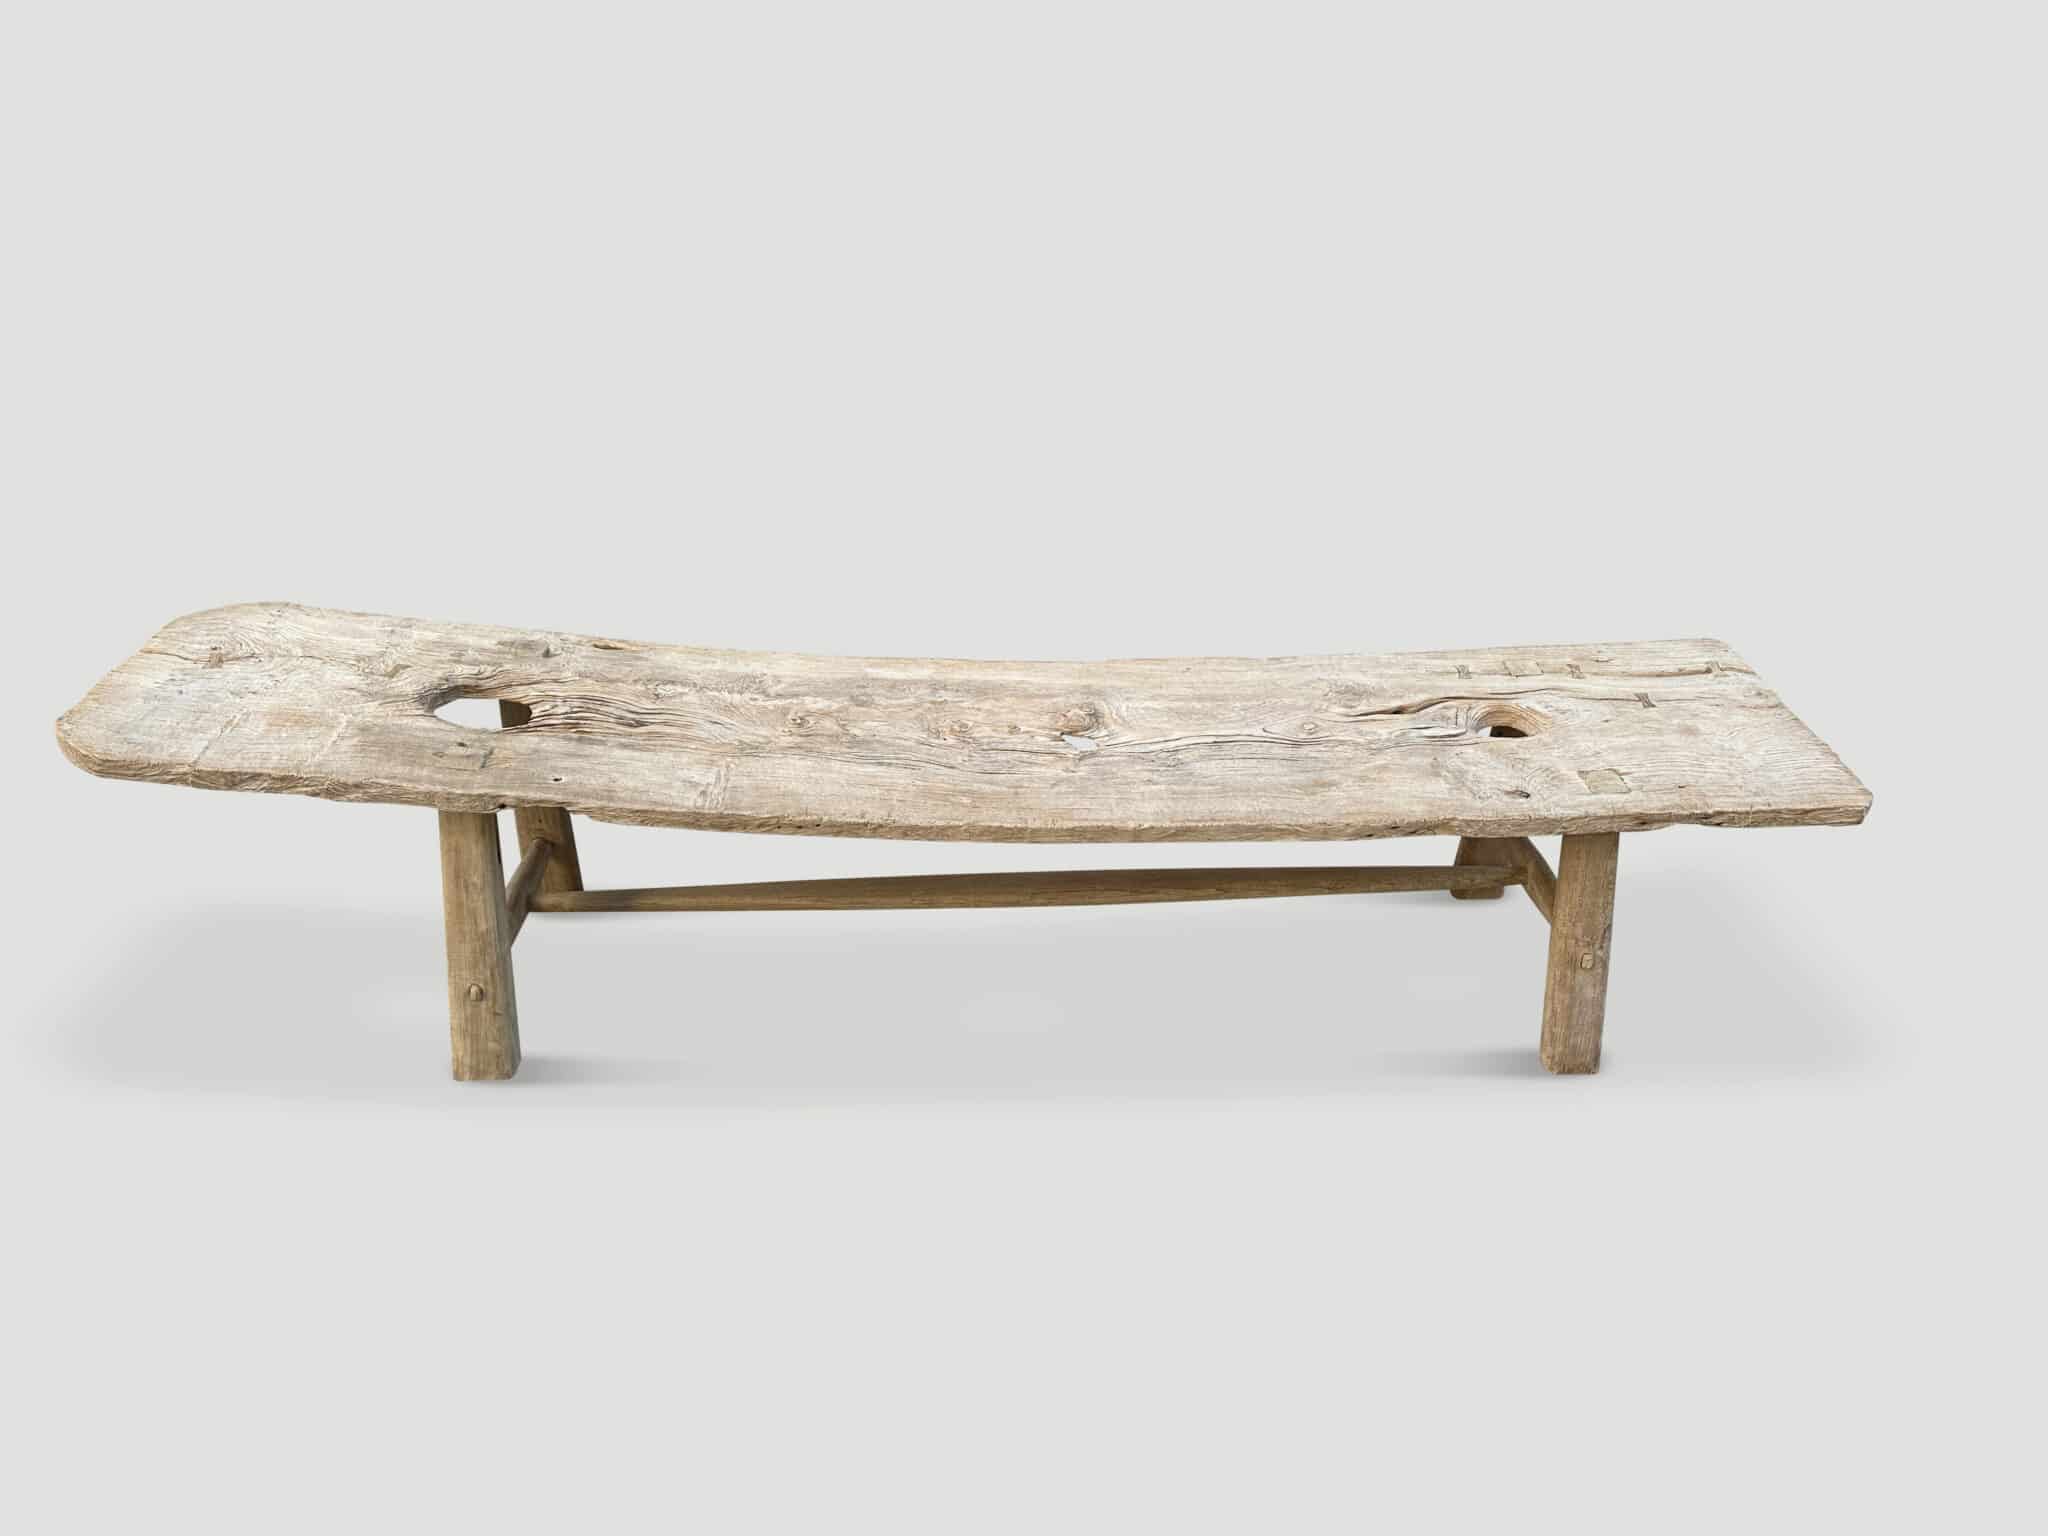 IMPRESSIVE BLEACHED TEAK CHAISE OR BENCH